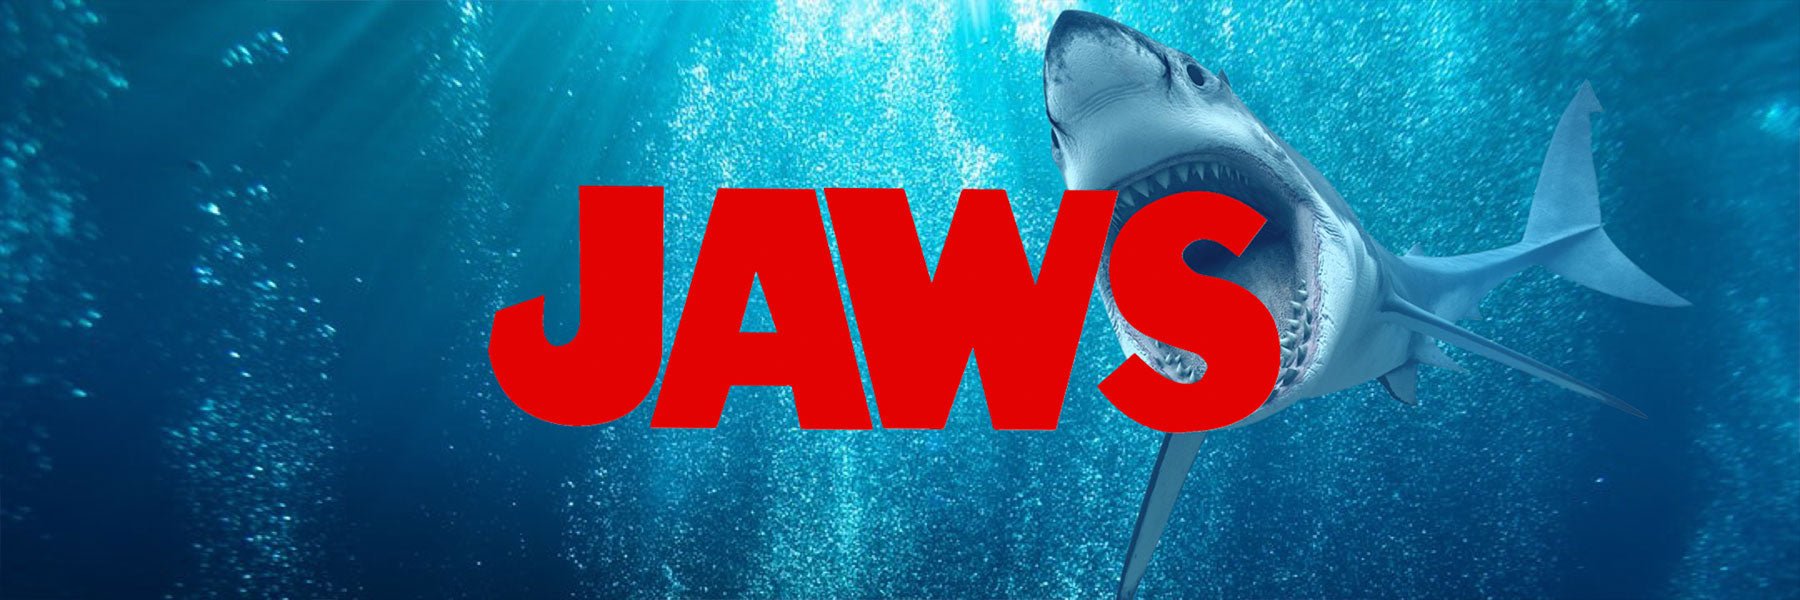 Jaws | HYPER iCONiC.